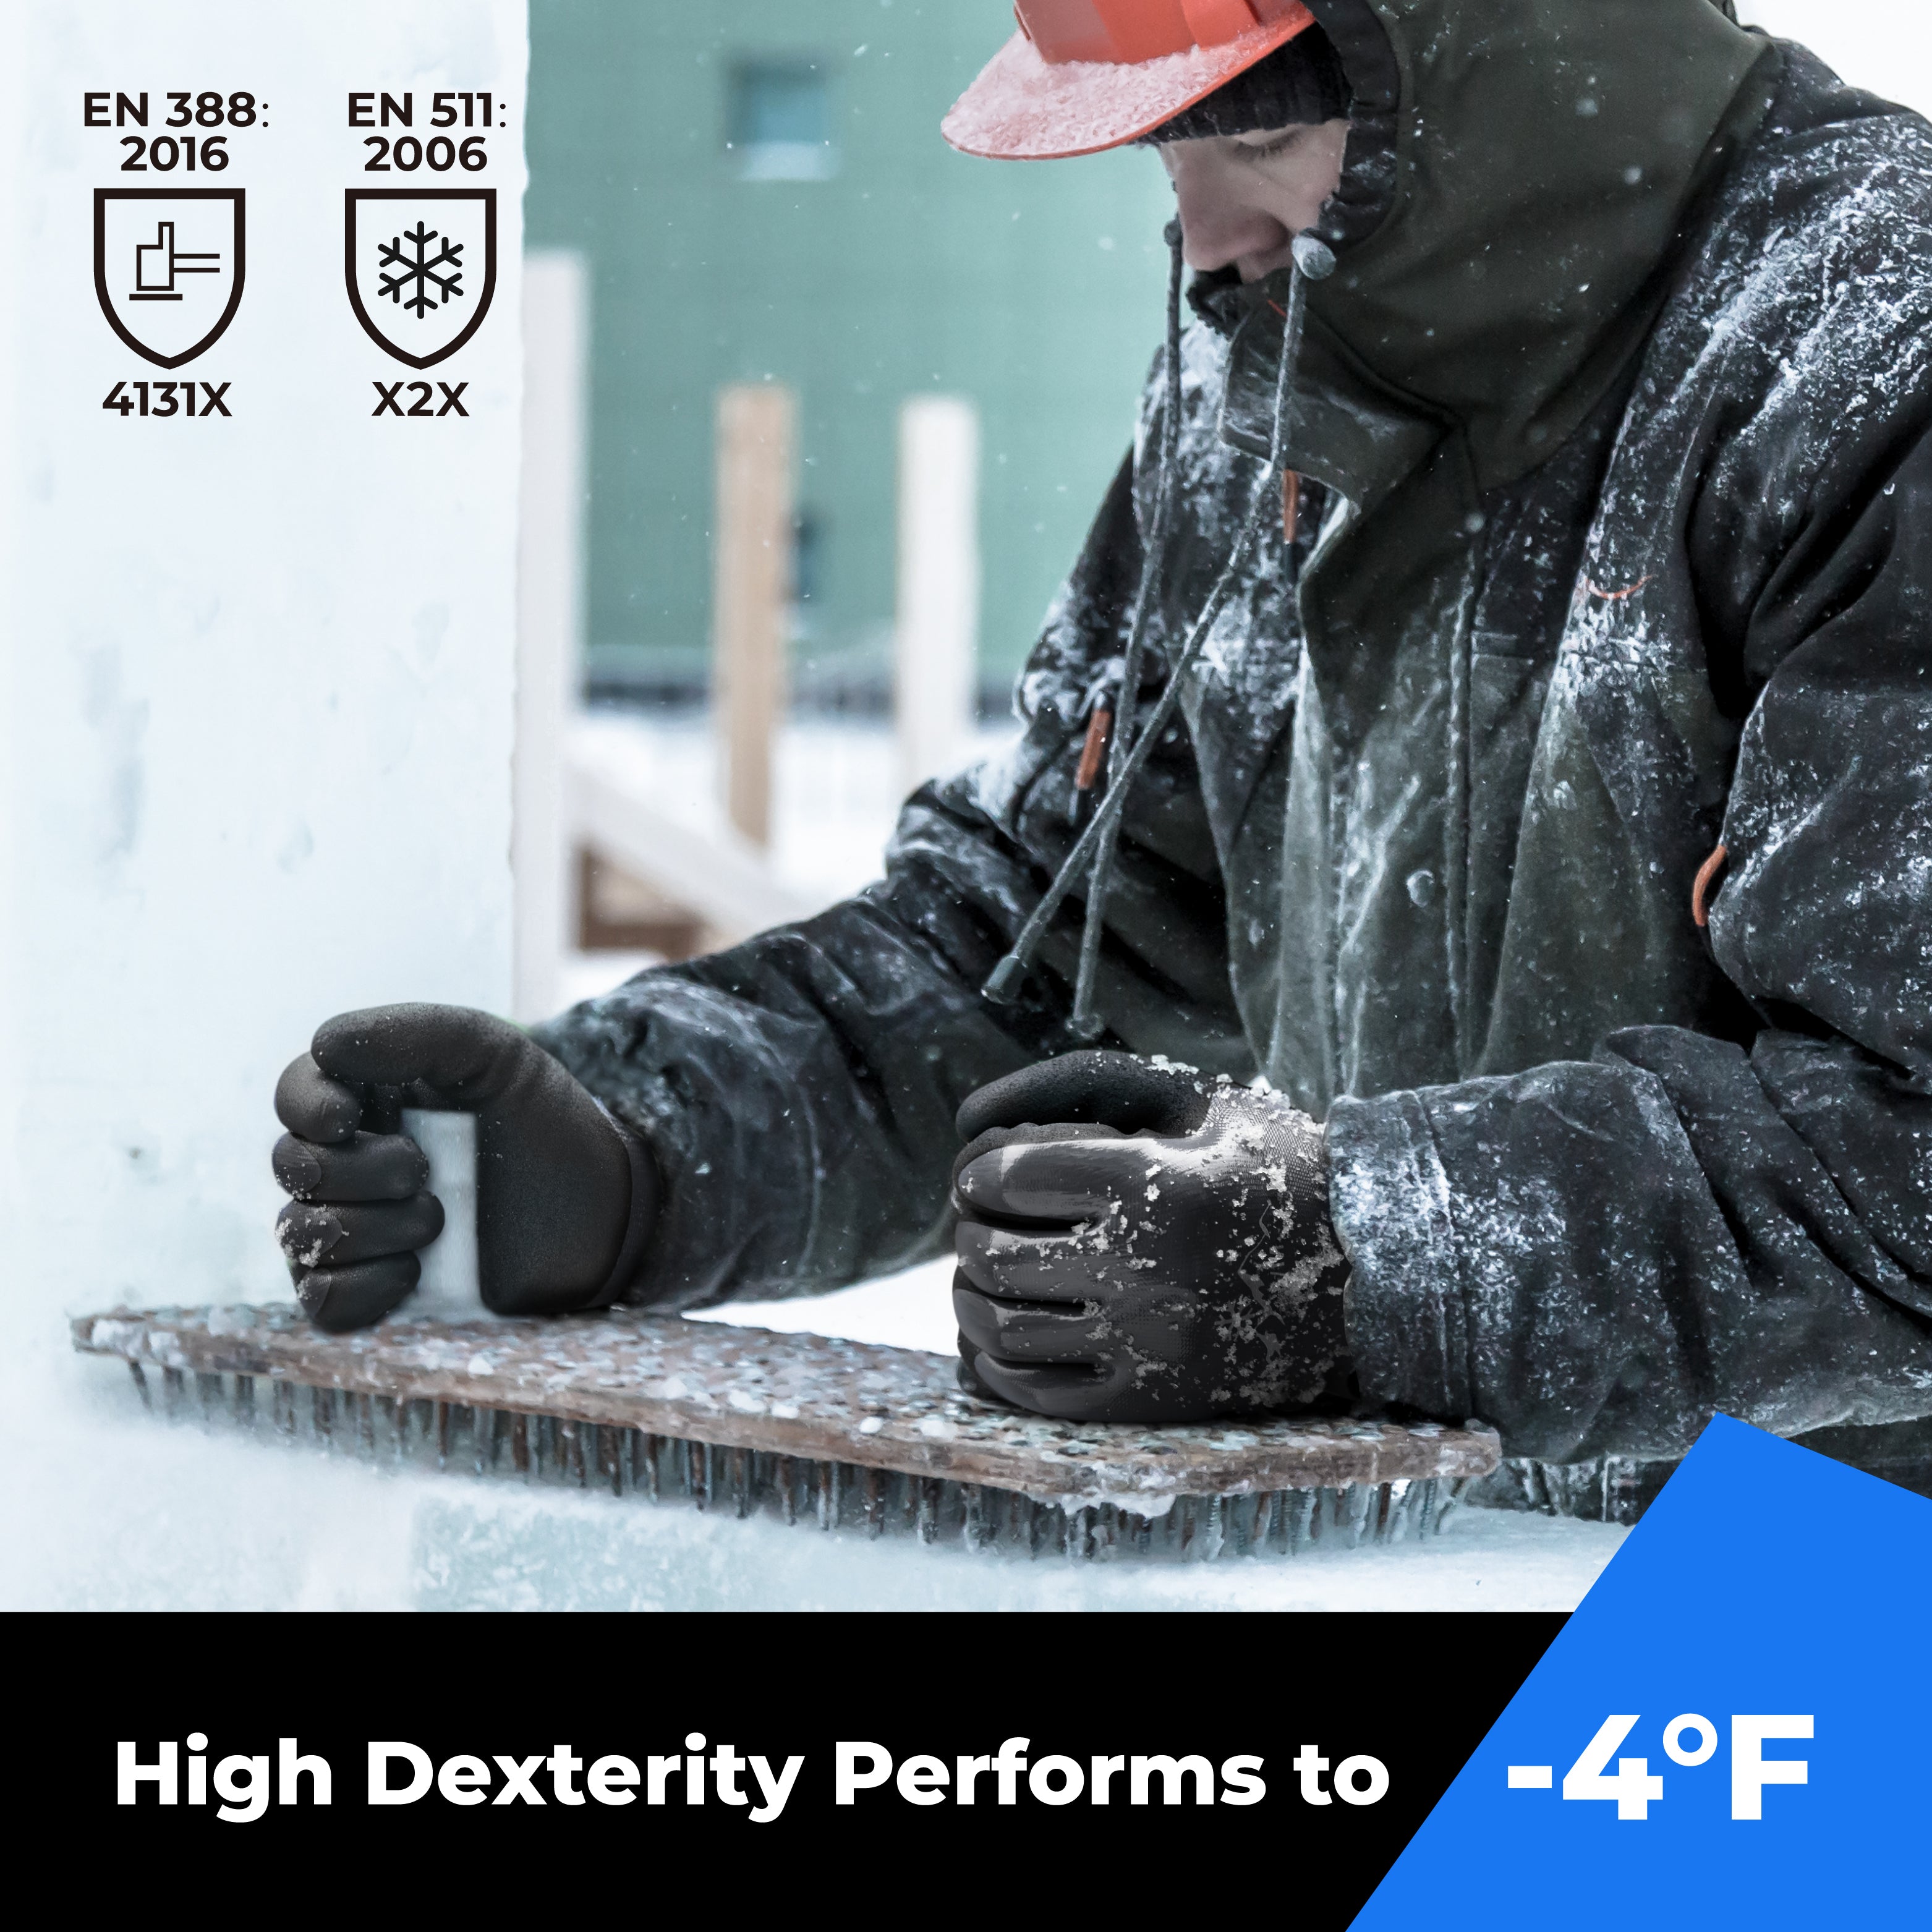 Waterproof and Oil Resistant Winter Gloves, Double Nitrile Dipped for Heavy-duty Construction in Winter